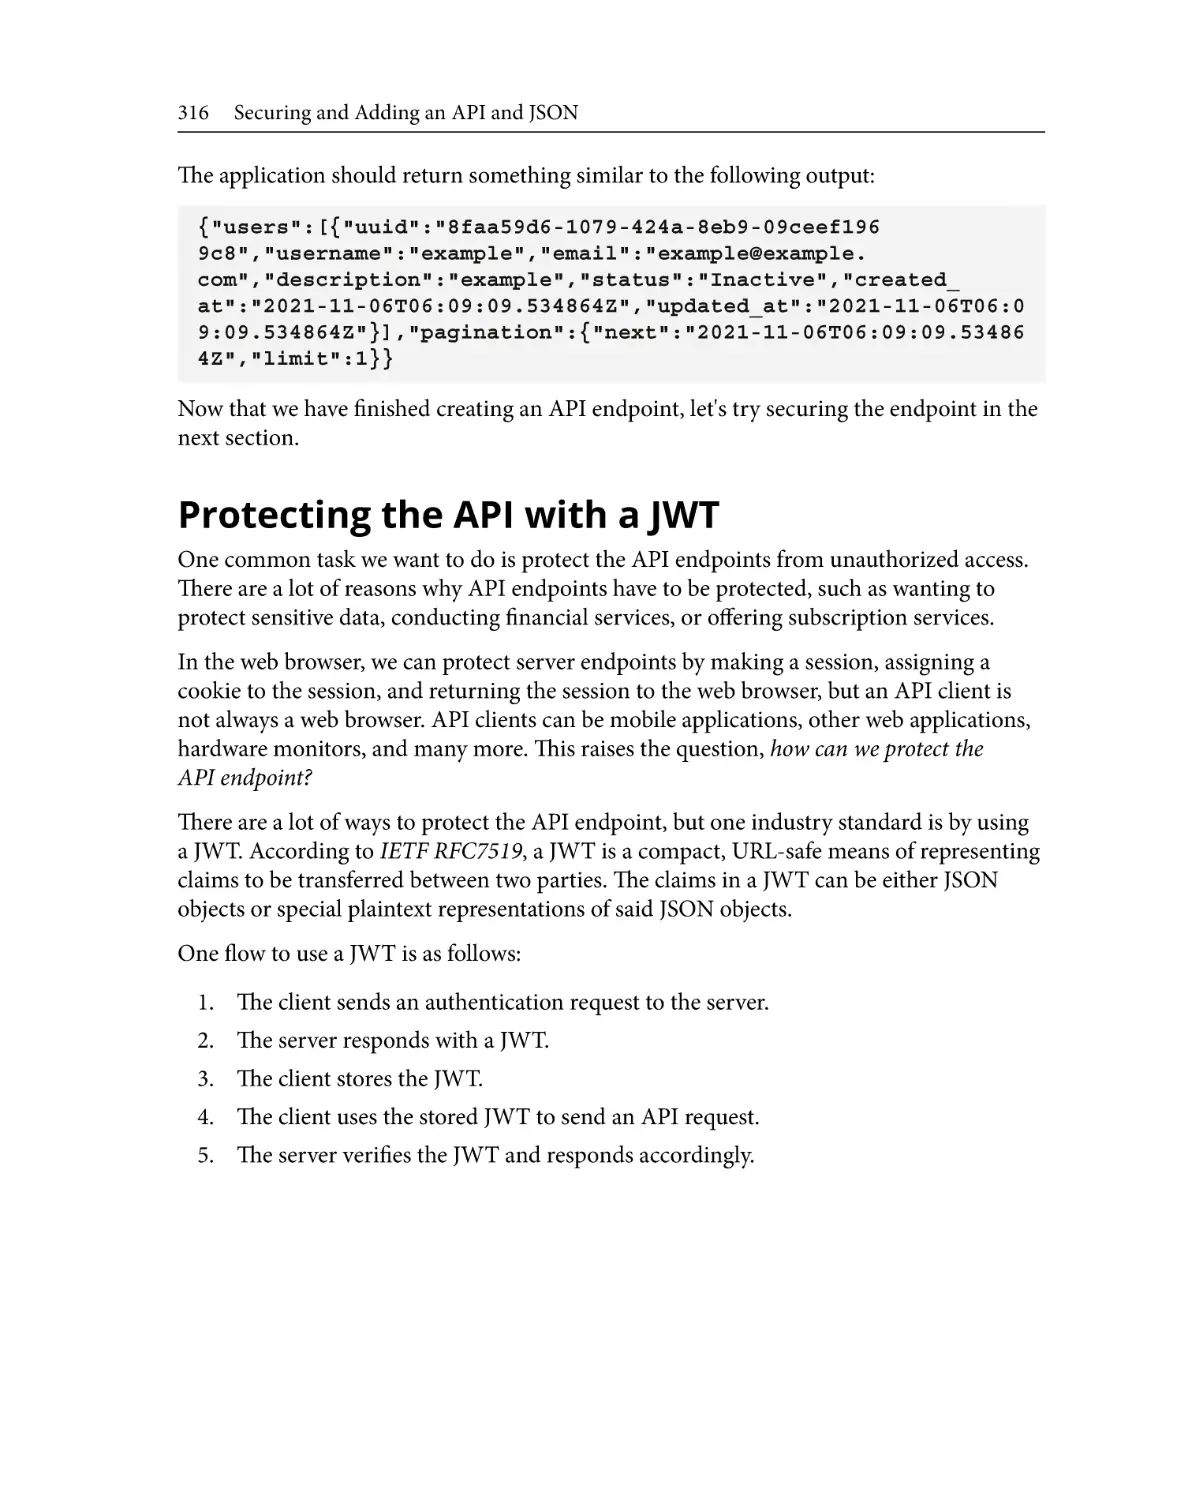 Protecting the API with a JWT